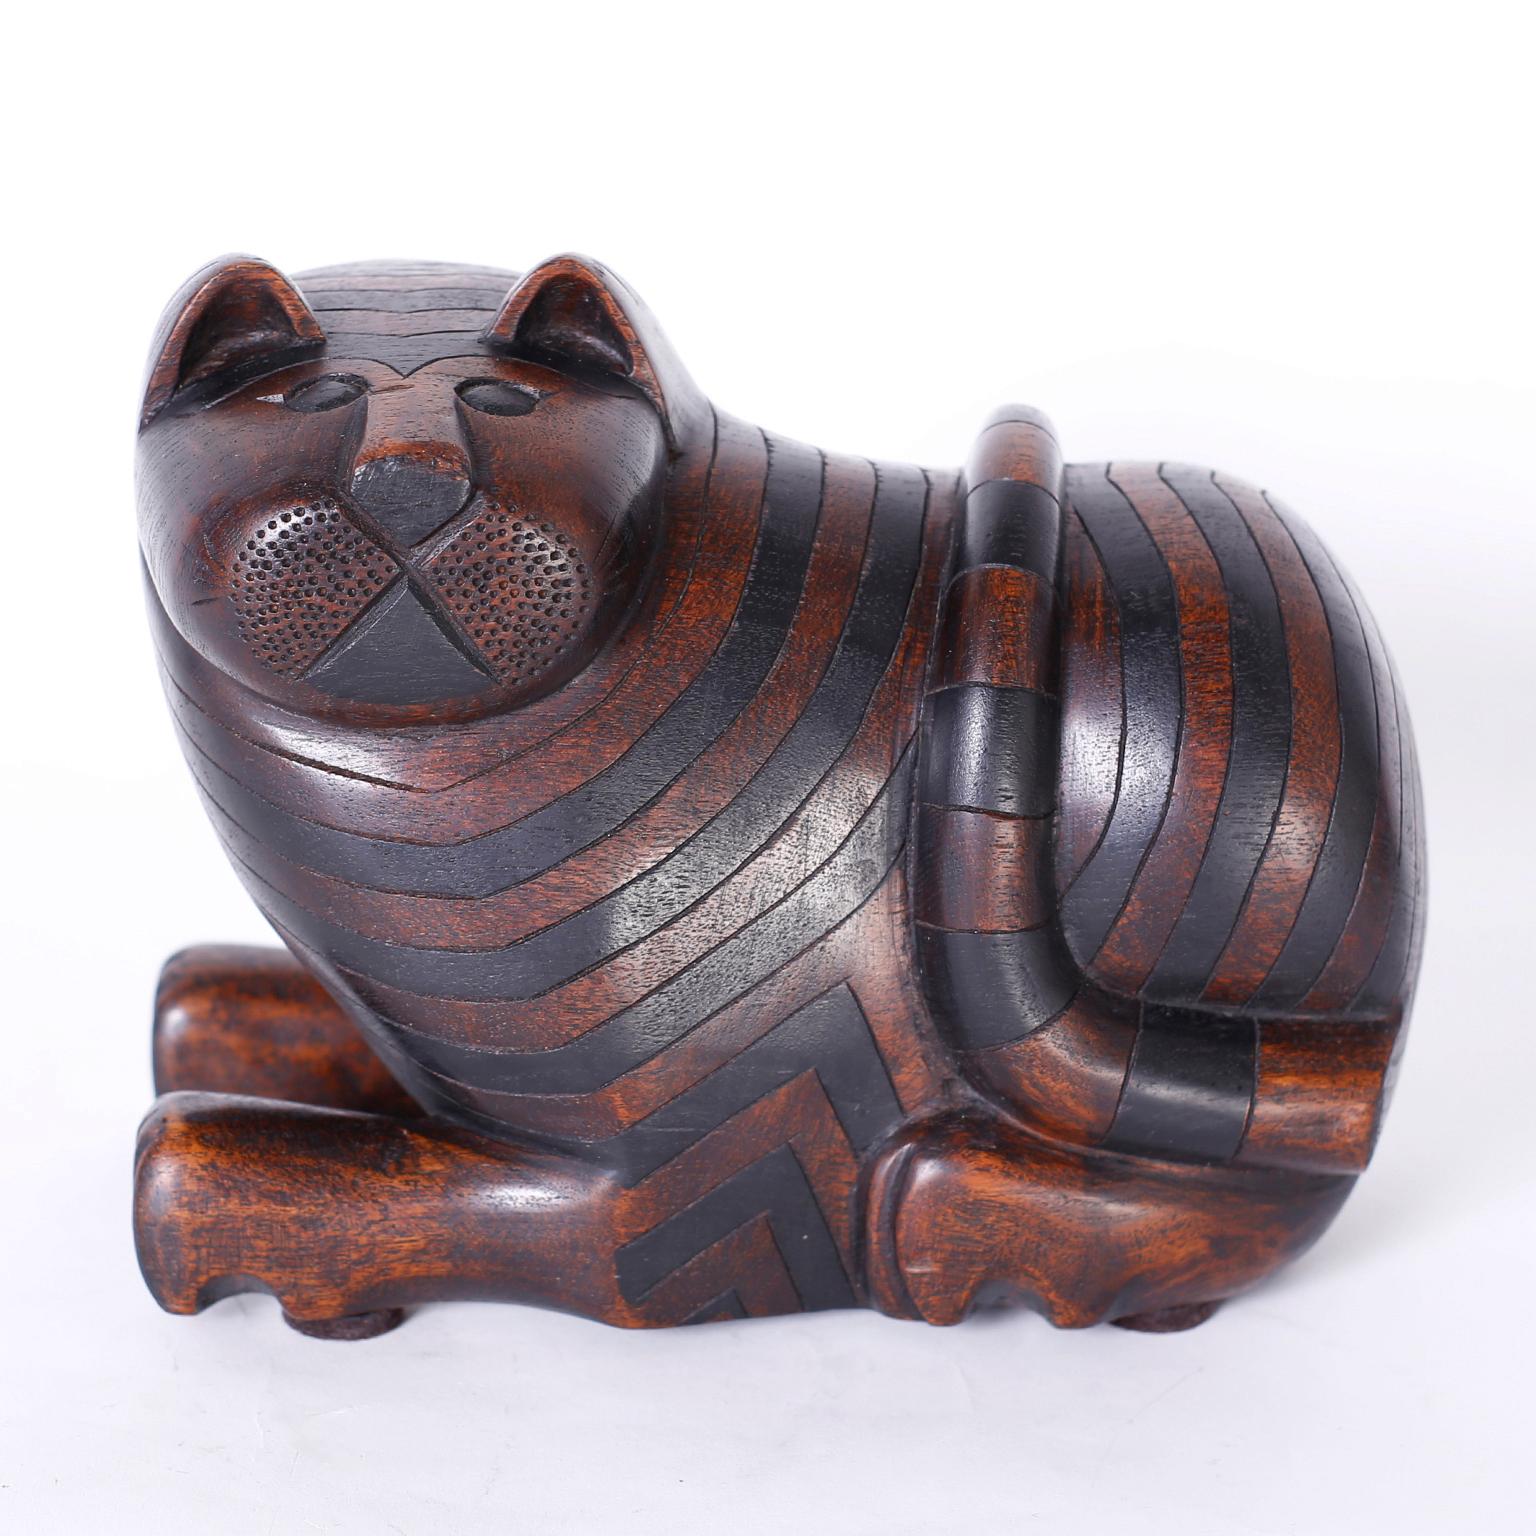 Anglo Indian carved mahogany cat with ebonized stripes and a curious expression, featuring a secret compartment on the bottom.